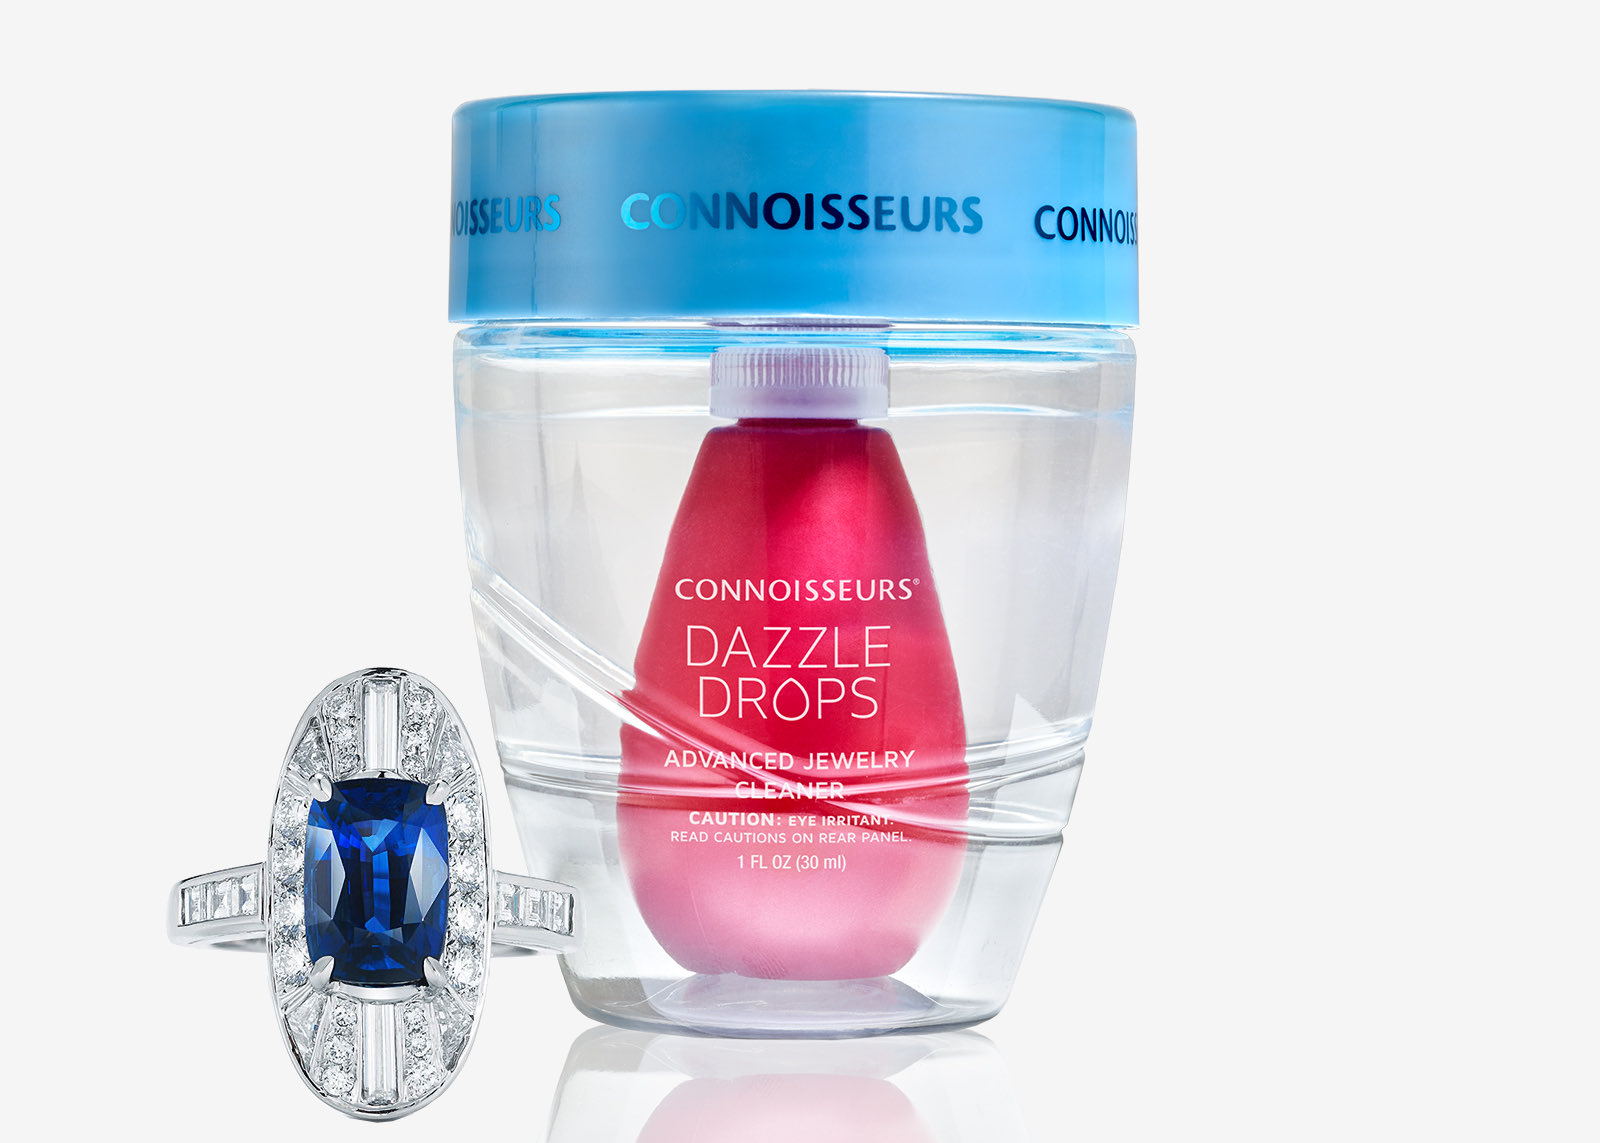 Connoisseurs Advanced Jewelry Cleaner Dazzle Drops : Target